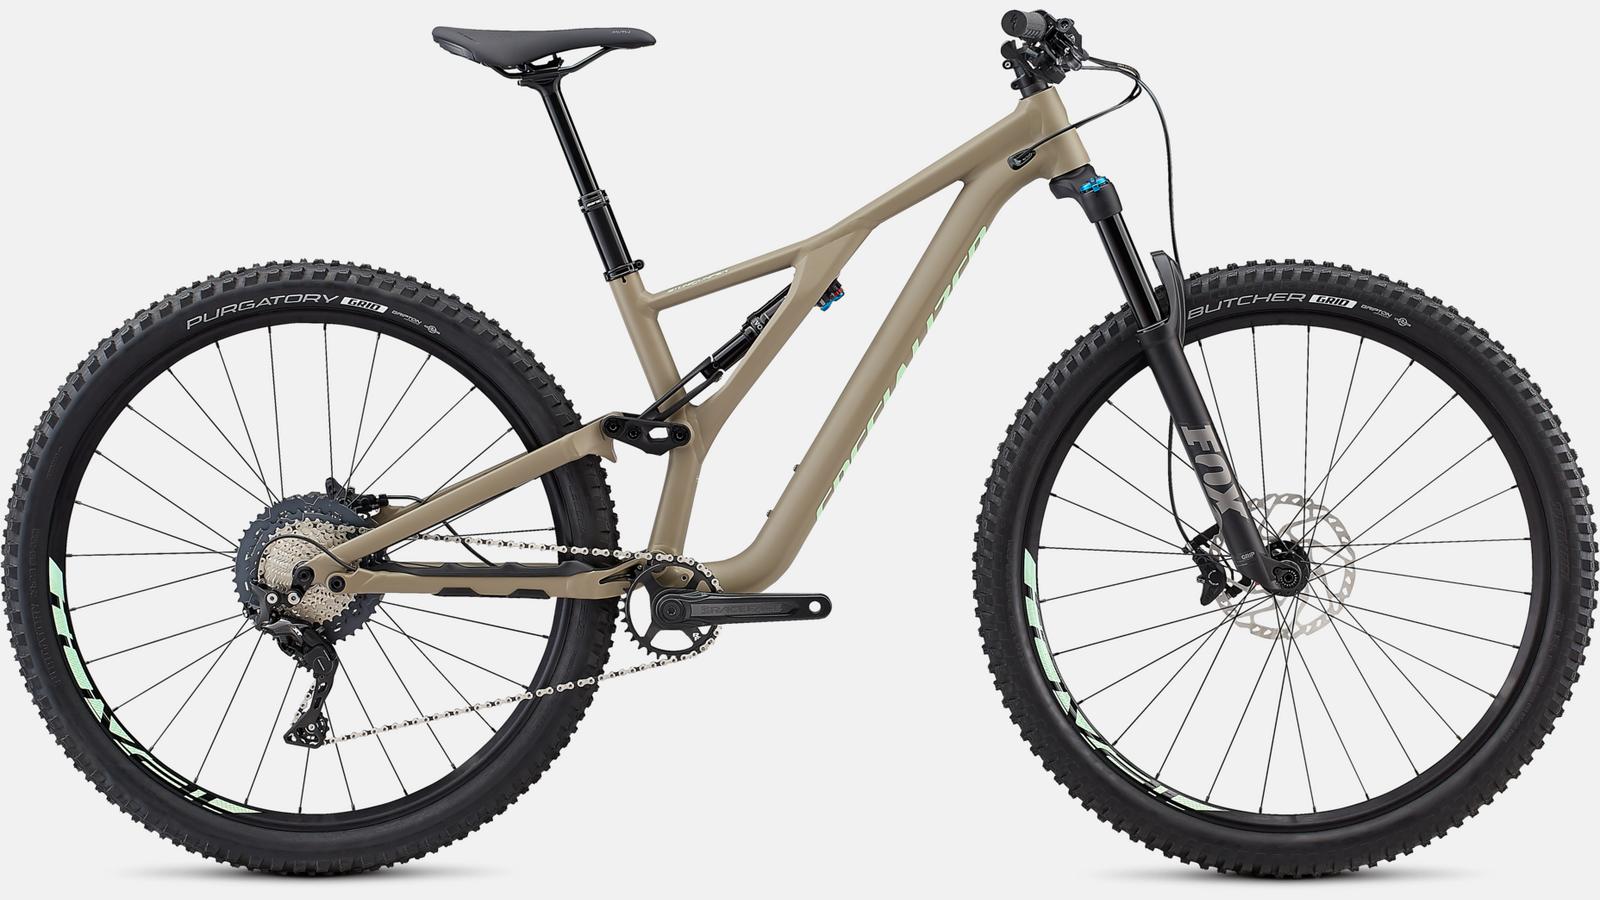 Paint for 2018 Specialized Women's Stumpjumper ST Comp Alloy 29 - Satin Taupe